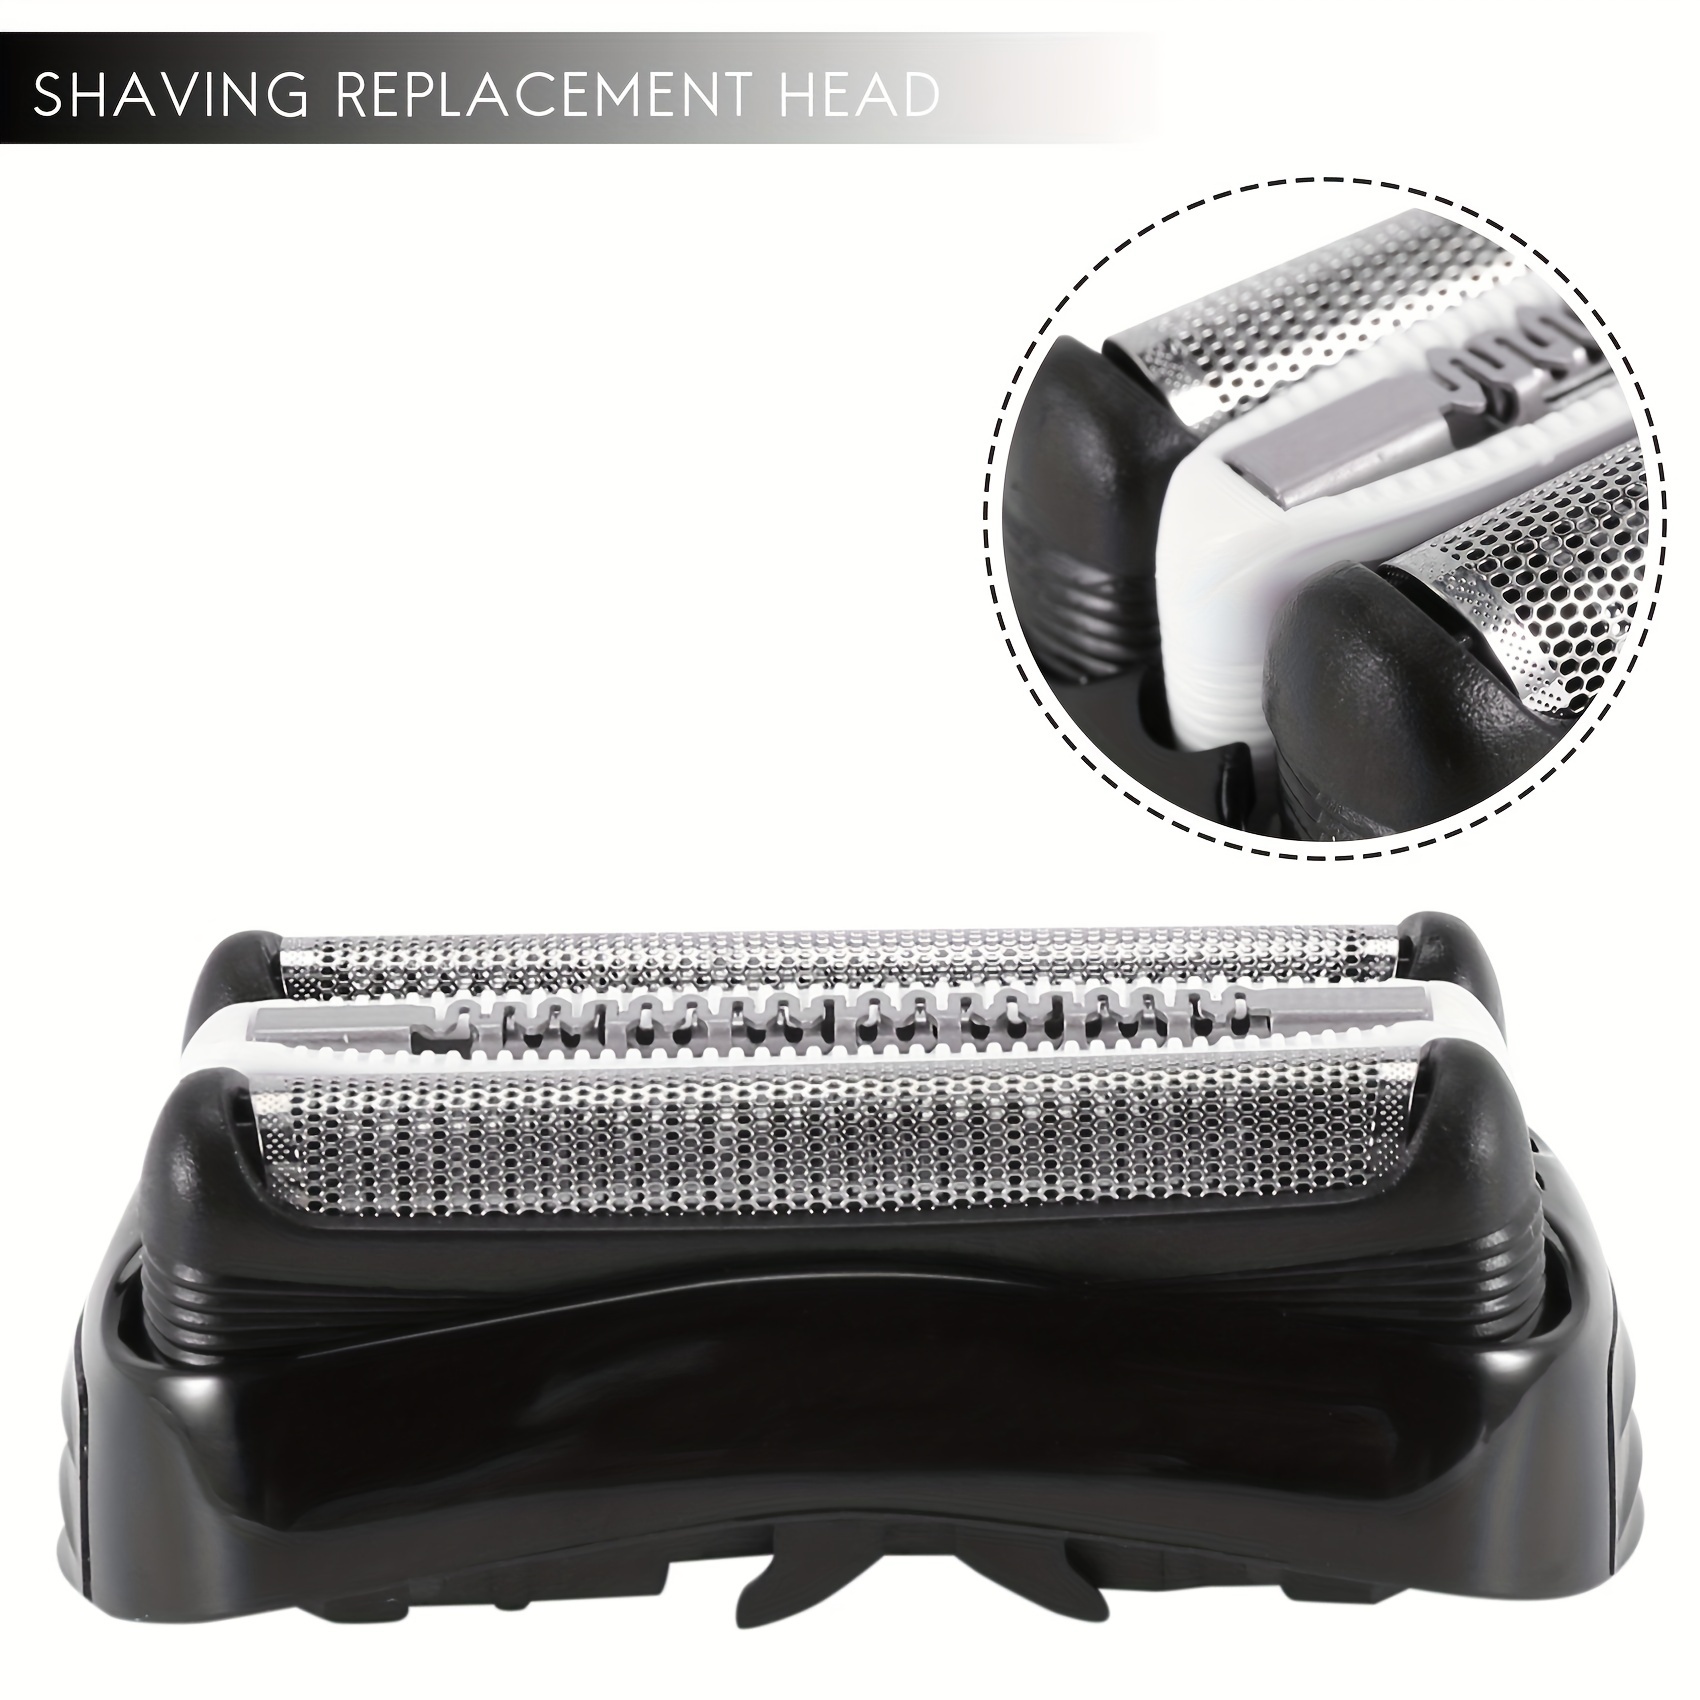 32B S3 Electric Replacement Shaver Head Accessories for Braun Series3  Shaving Razor Head, Suitable for Braun